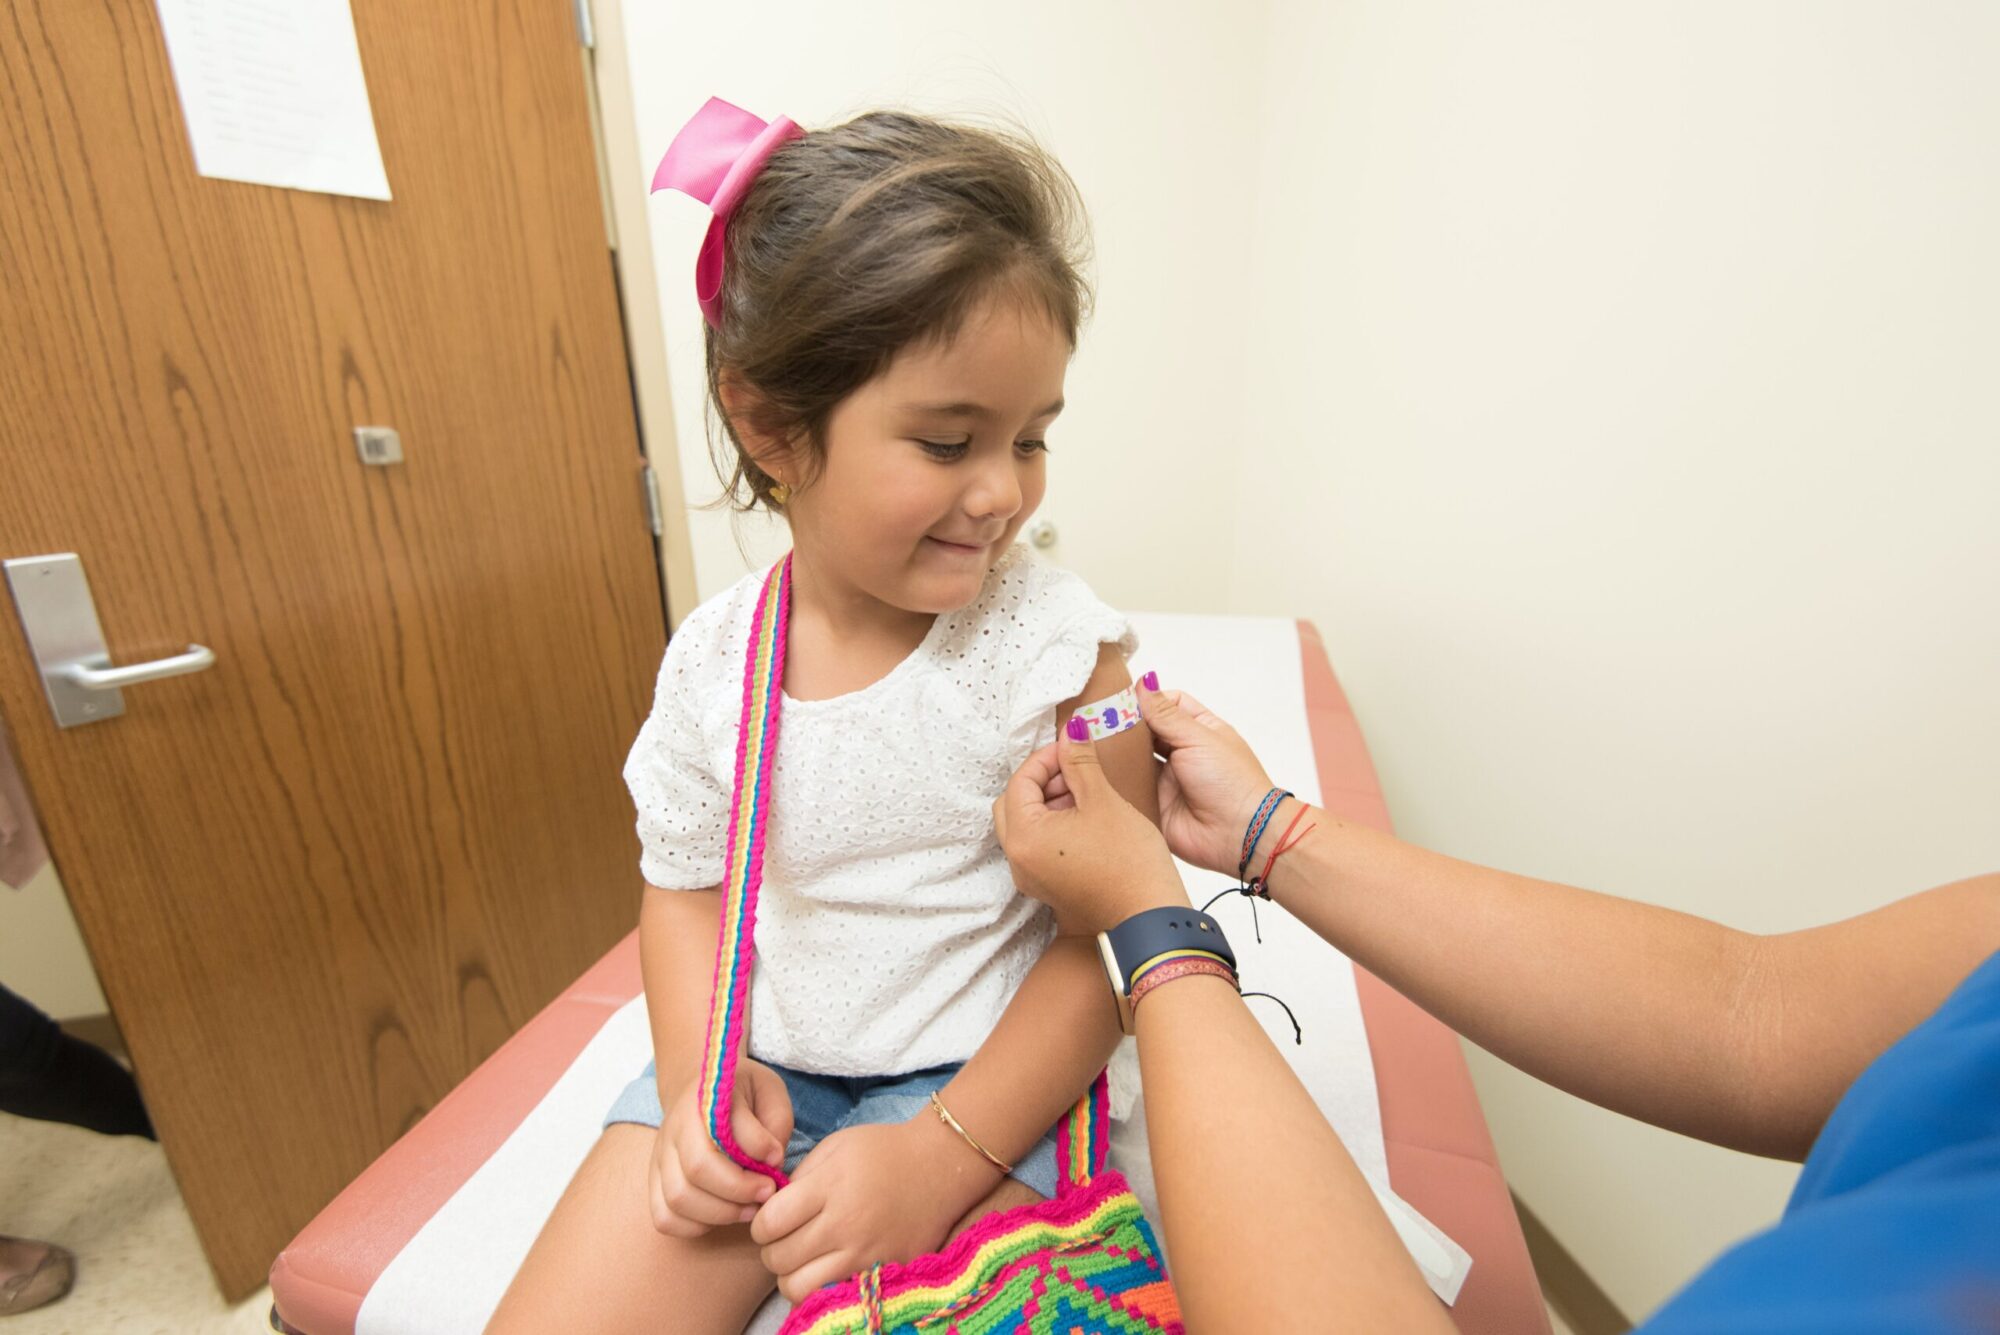 A girl getting vaccinated.